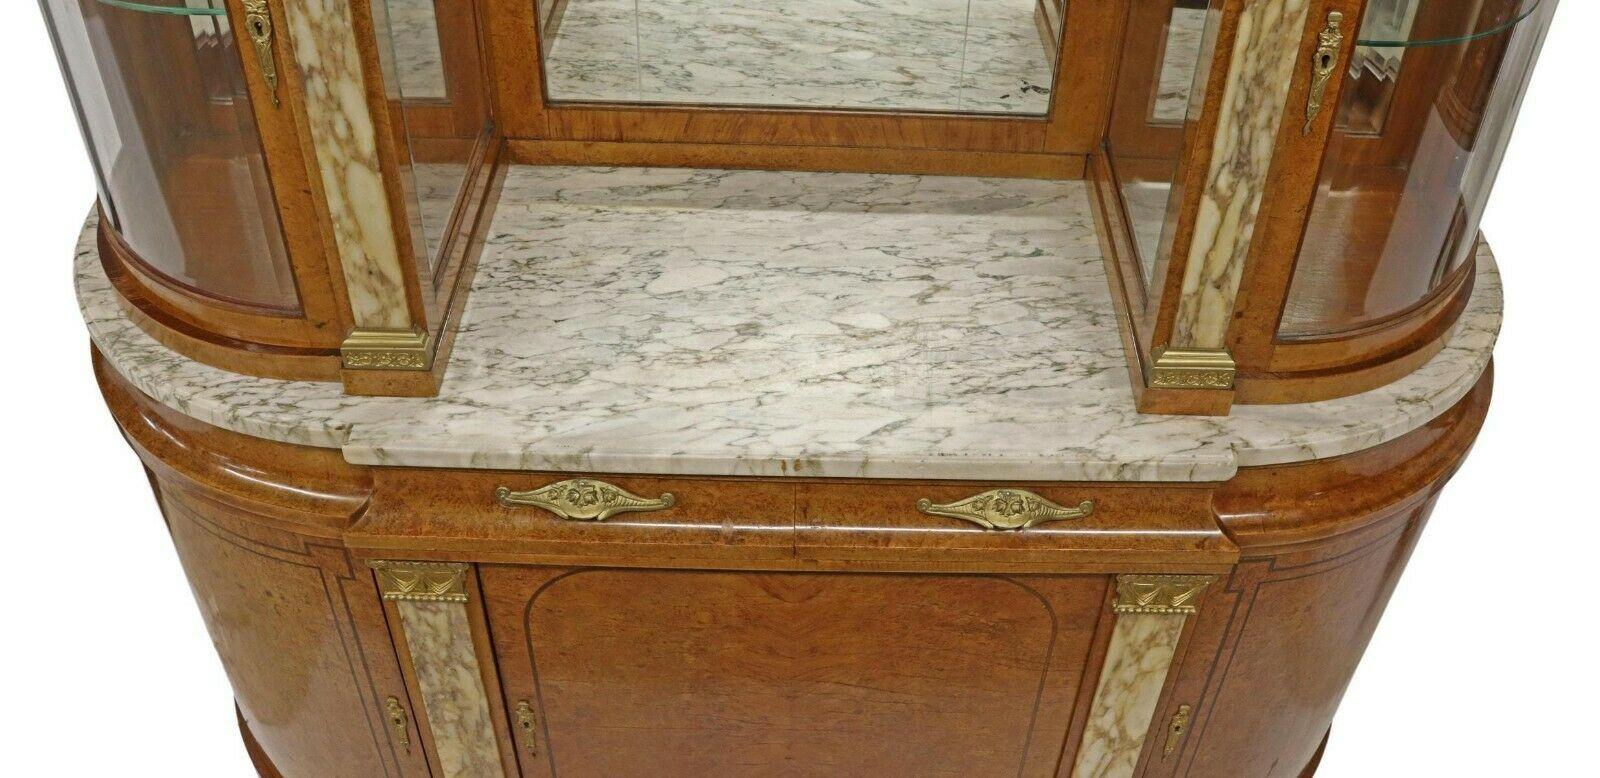 1900's Antique French Marble-Top, Burlwood, Mirror Display Server/Sideboard 2